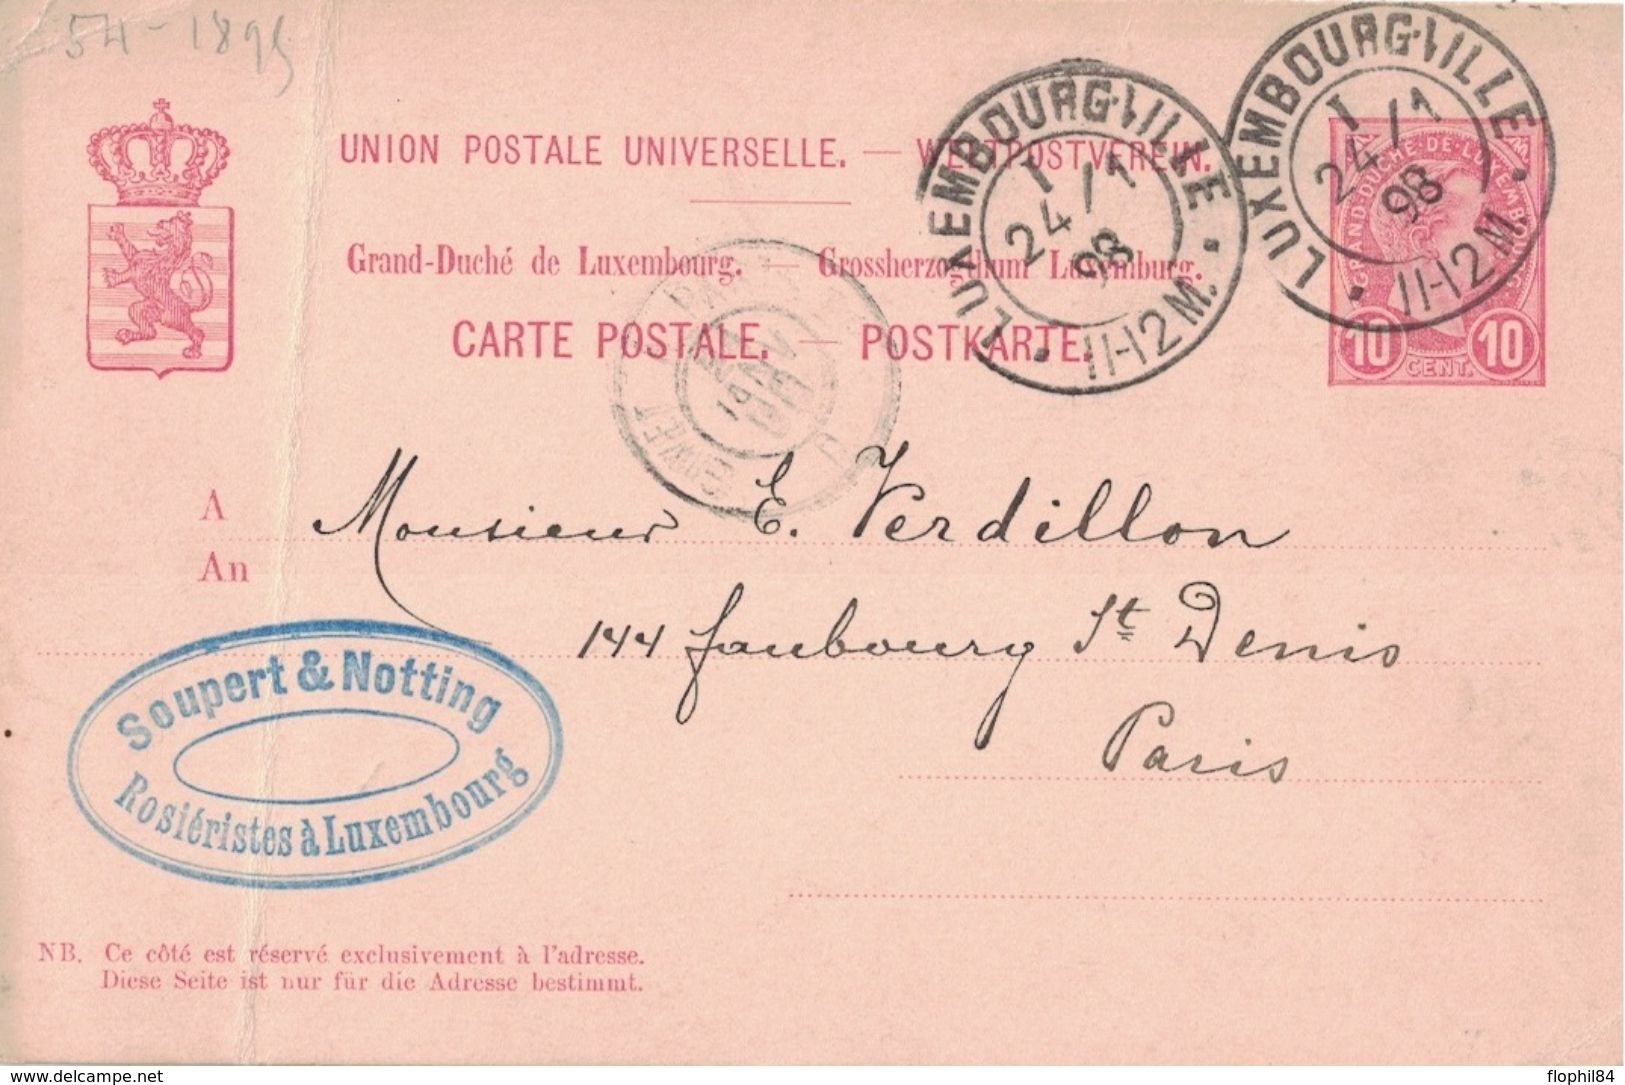 LUXEMBOURG - ENTIER POSTAL - LUXEMBOURGVILLE - 24-1-1898 (P1) - Entiers Postaux